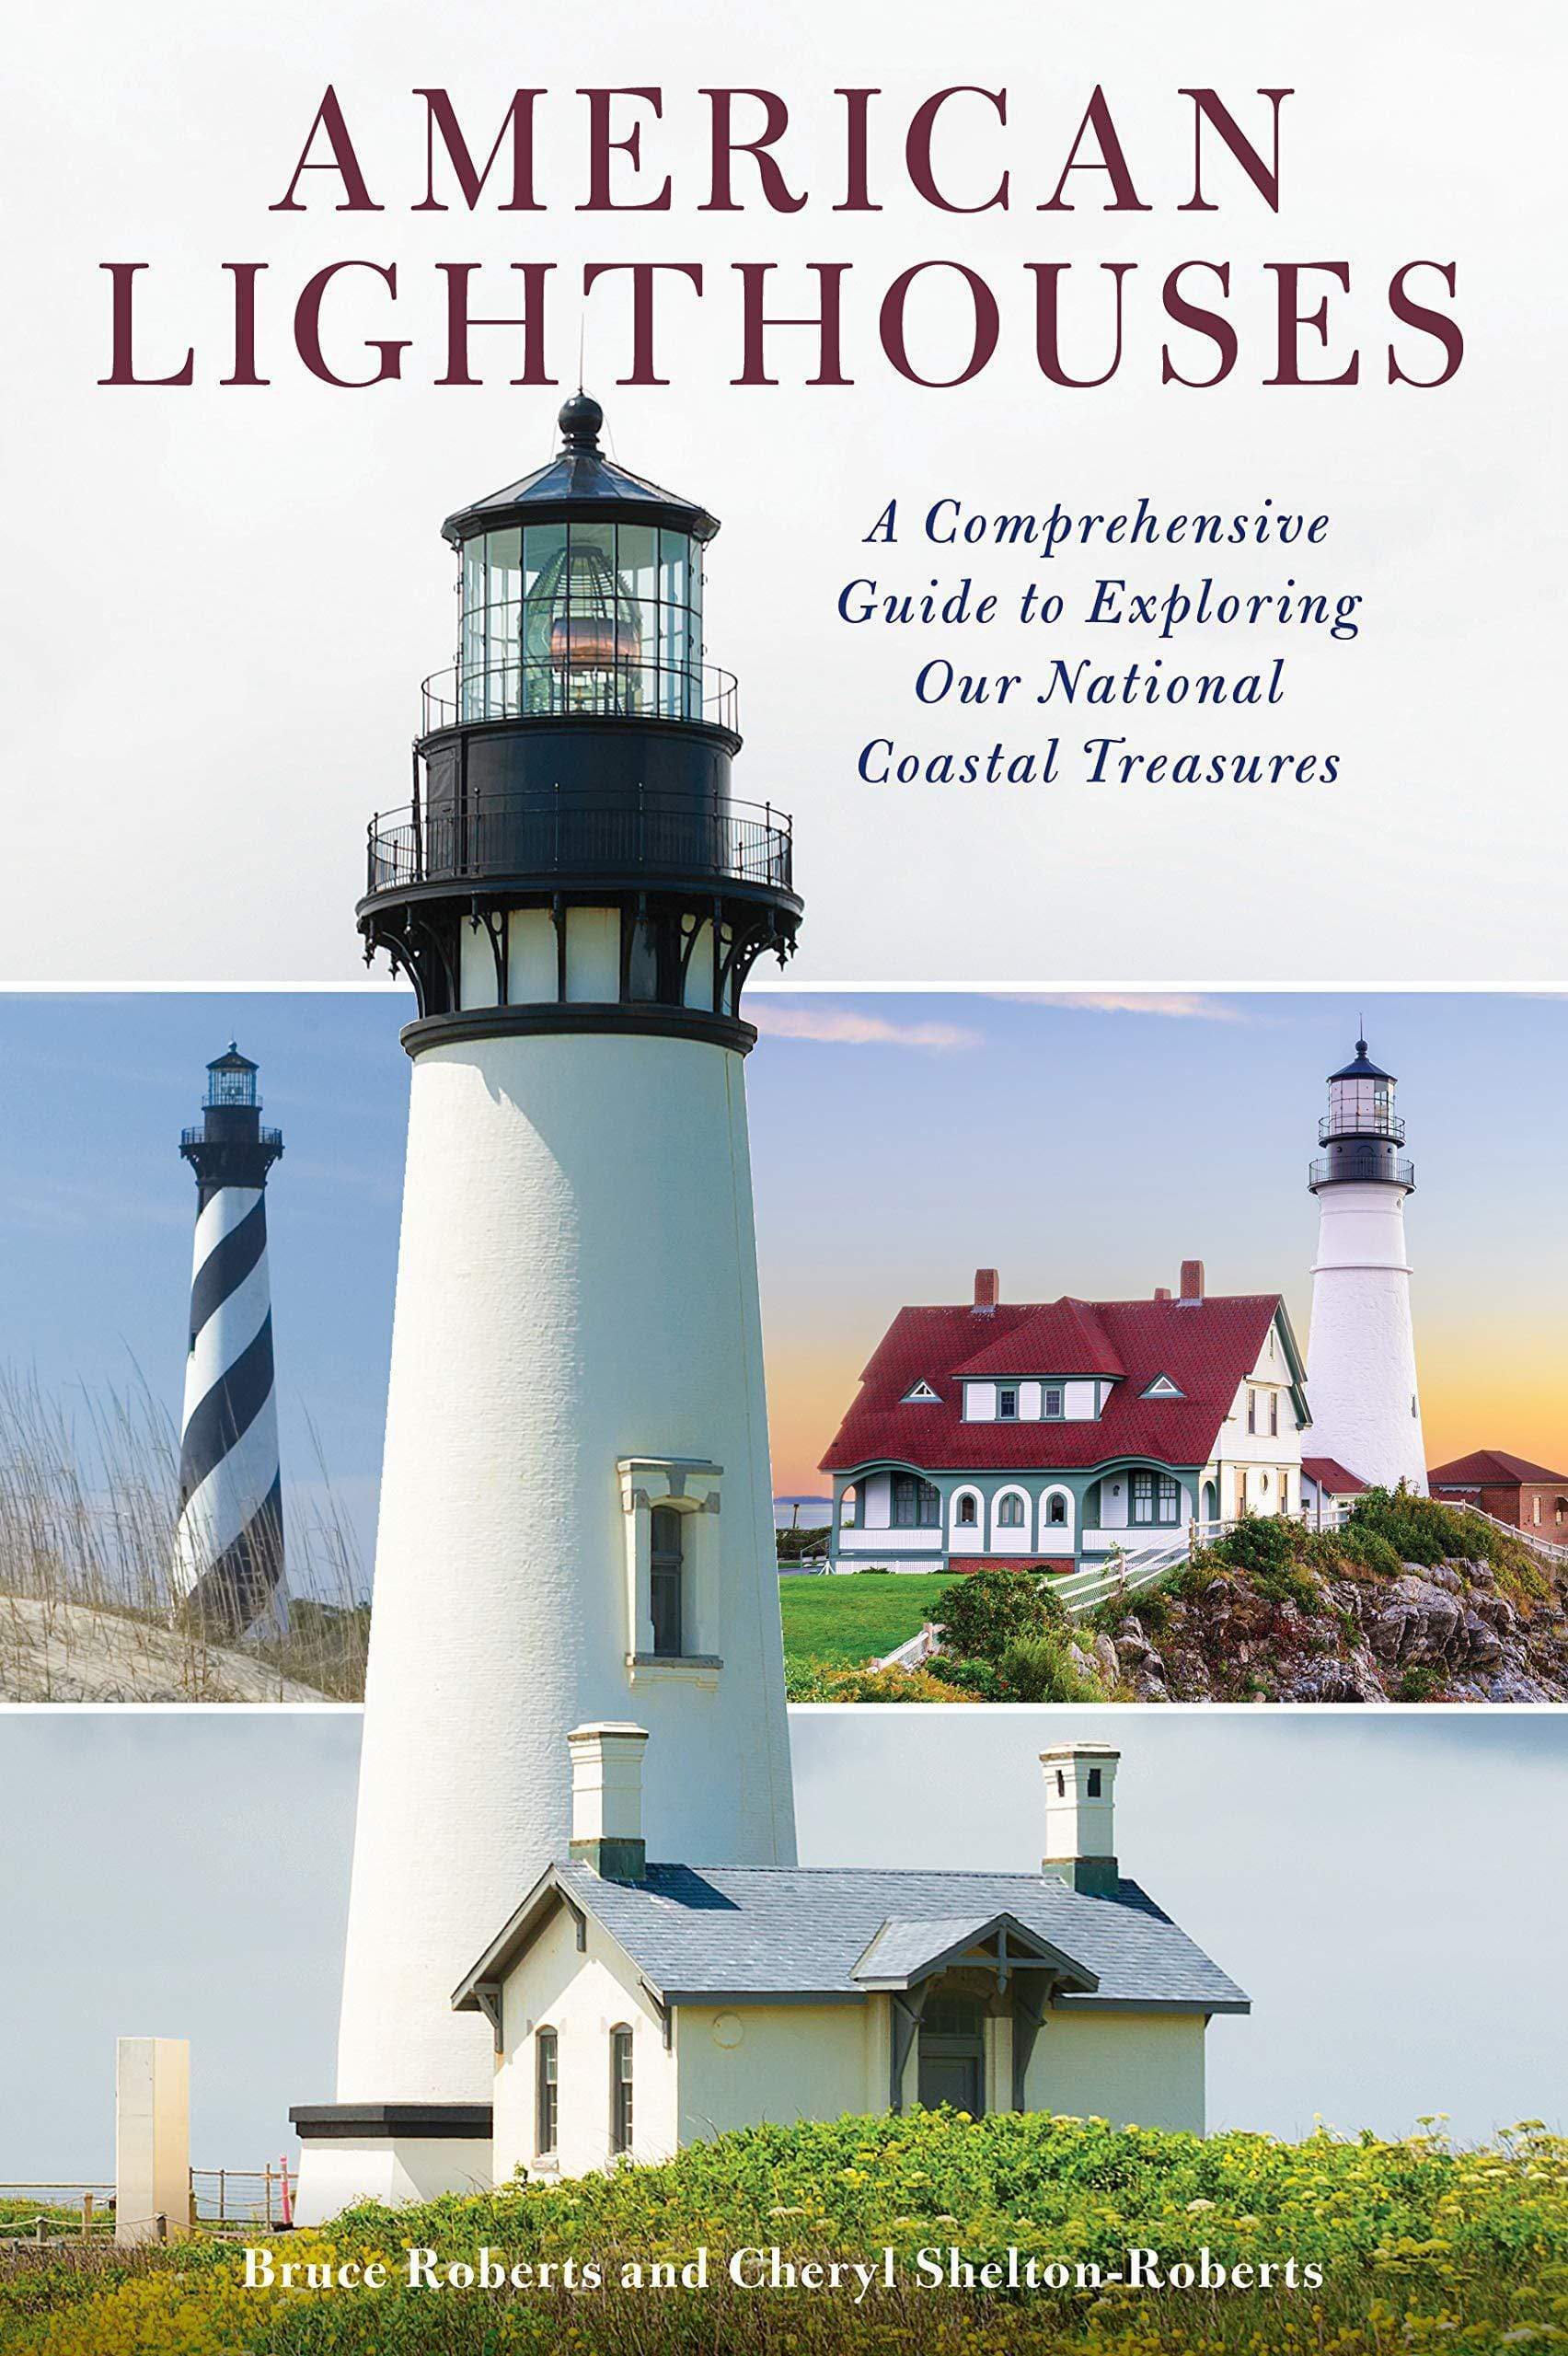 American Lighthouses: A Comprehensive Guide To Exploring Our National Coastal Treasures, 4th Edition